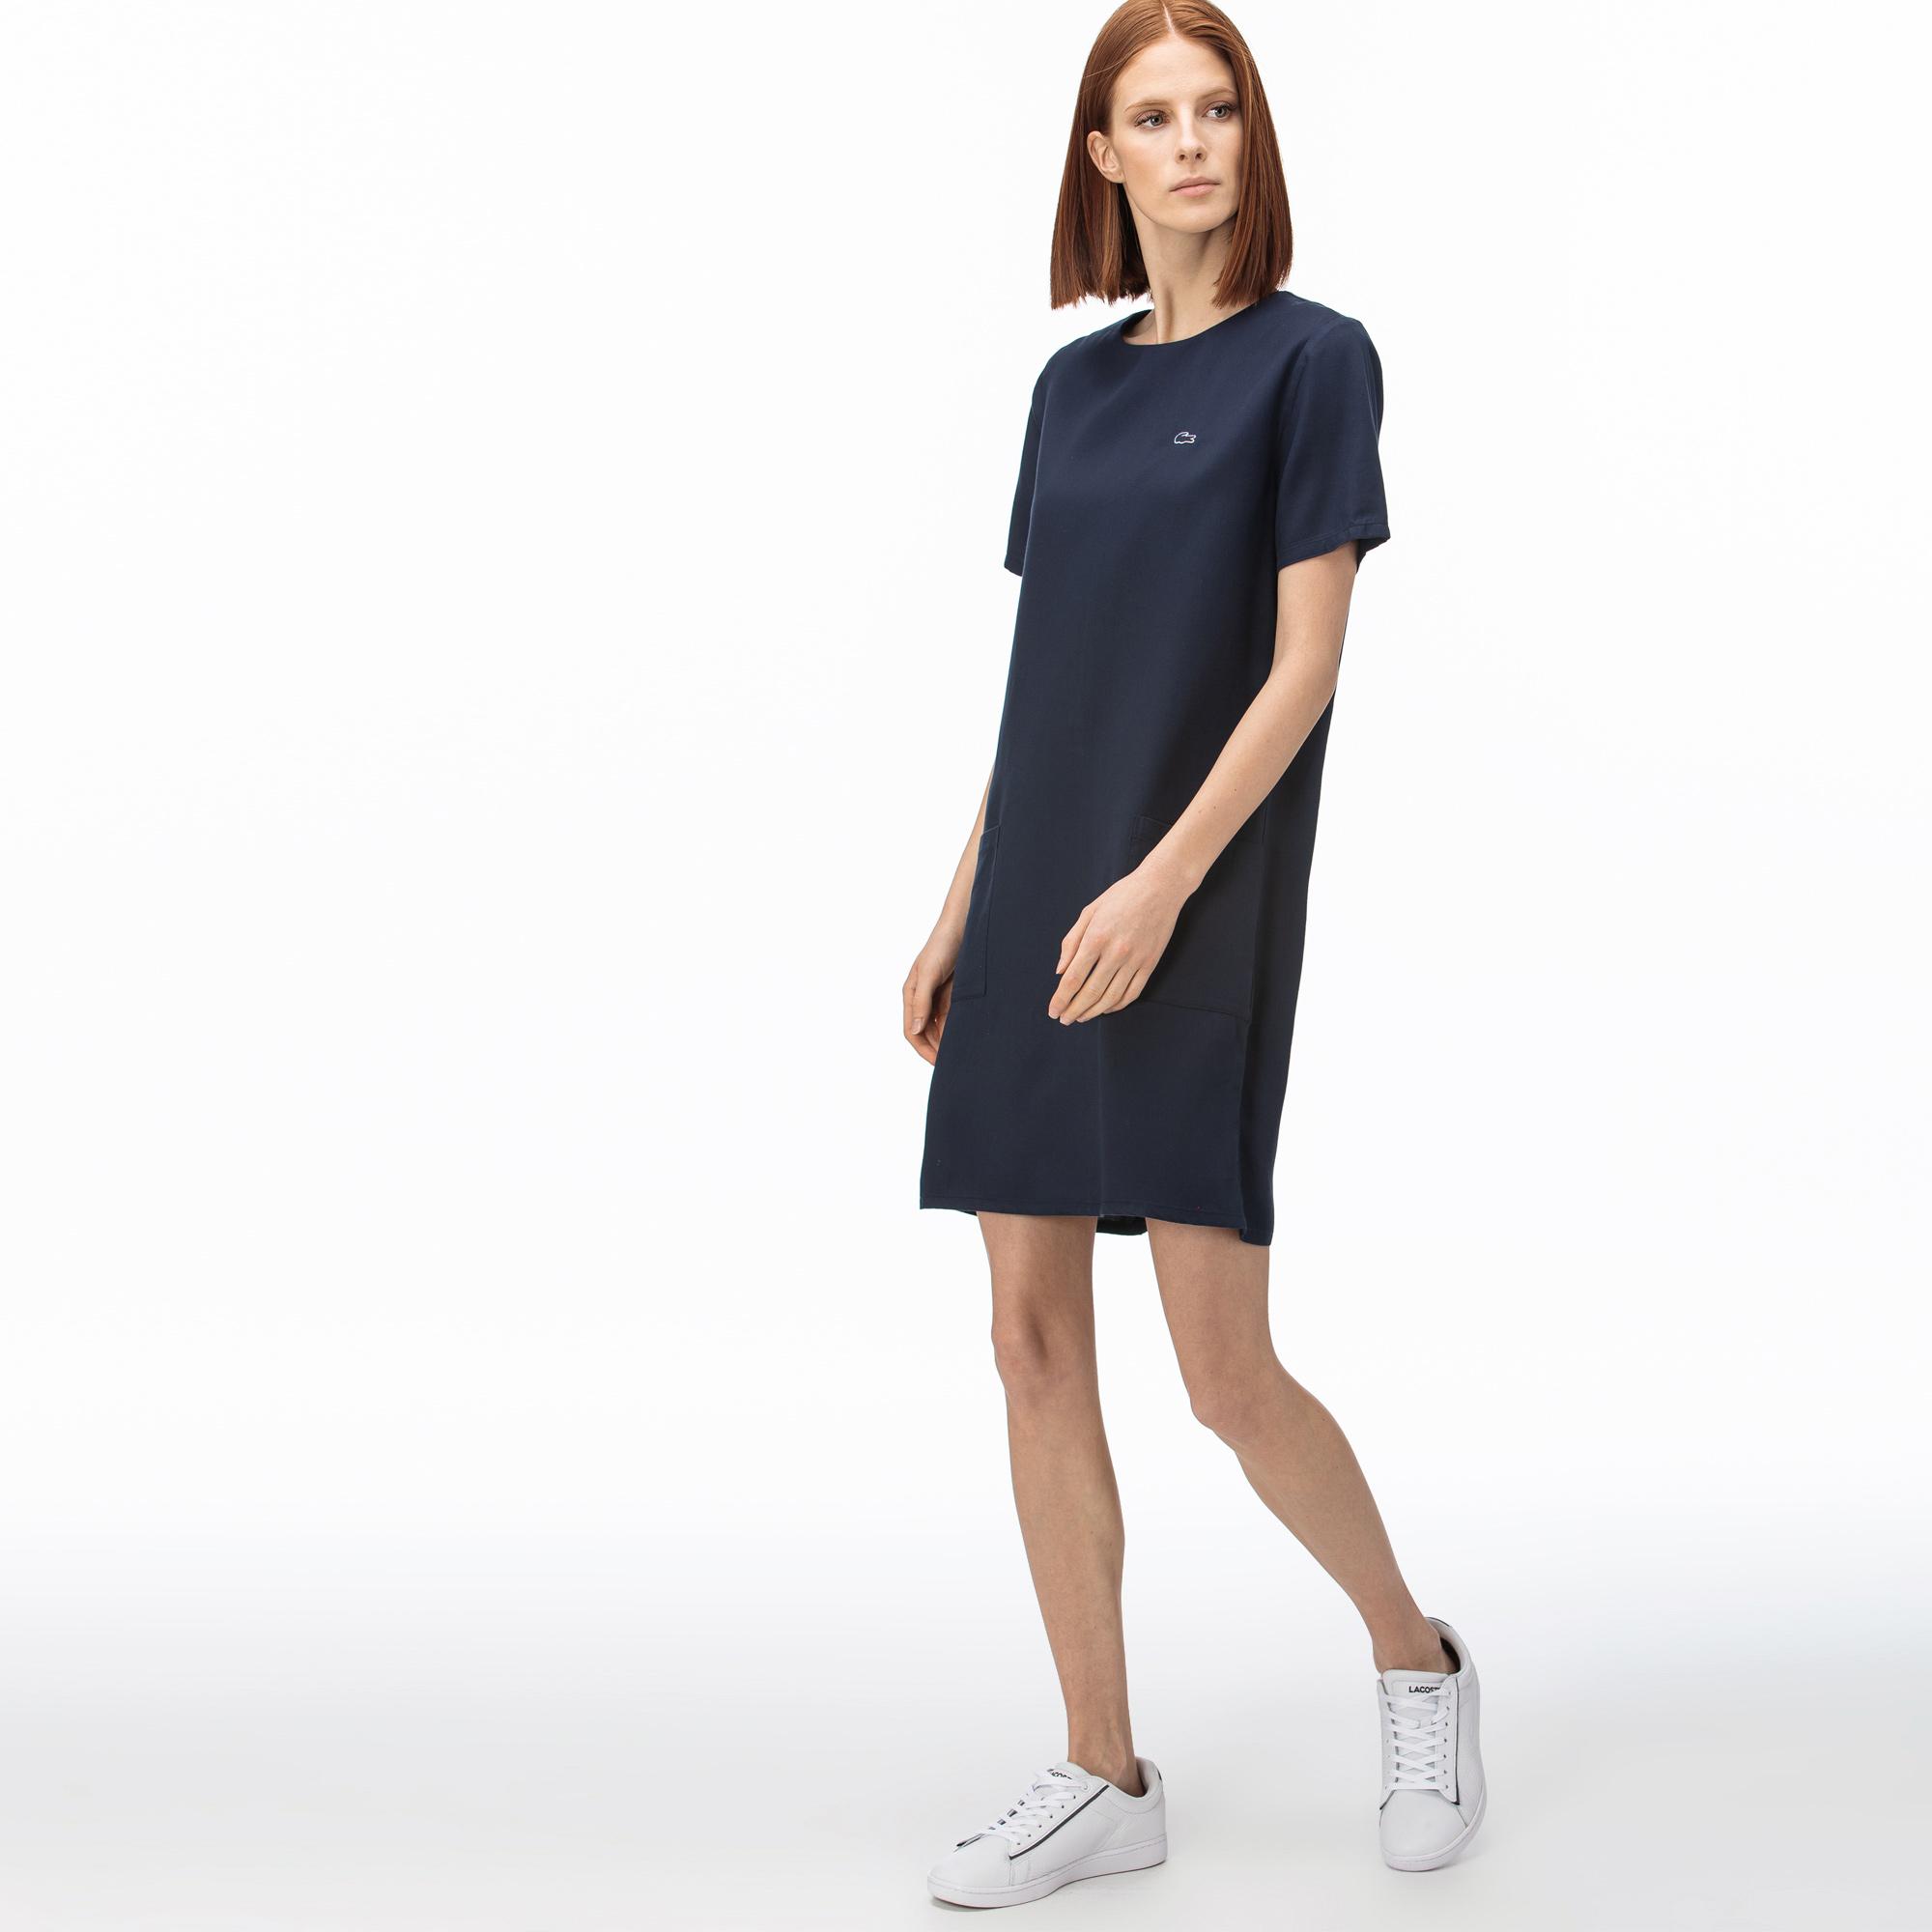 Lacoste dresss women with short sleeves and round neckline